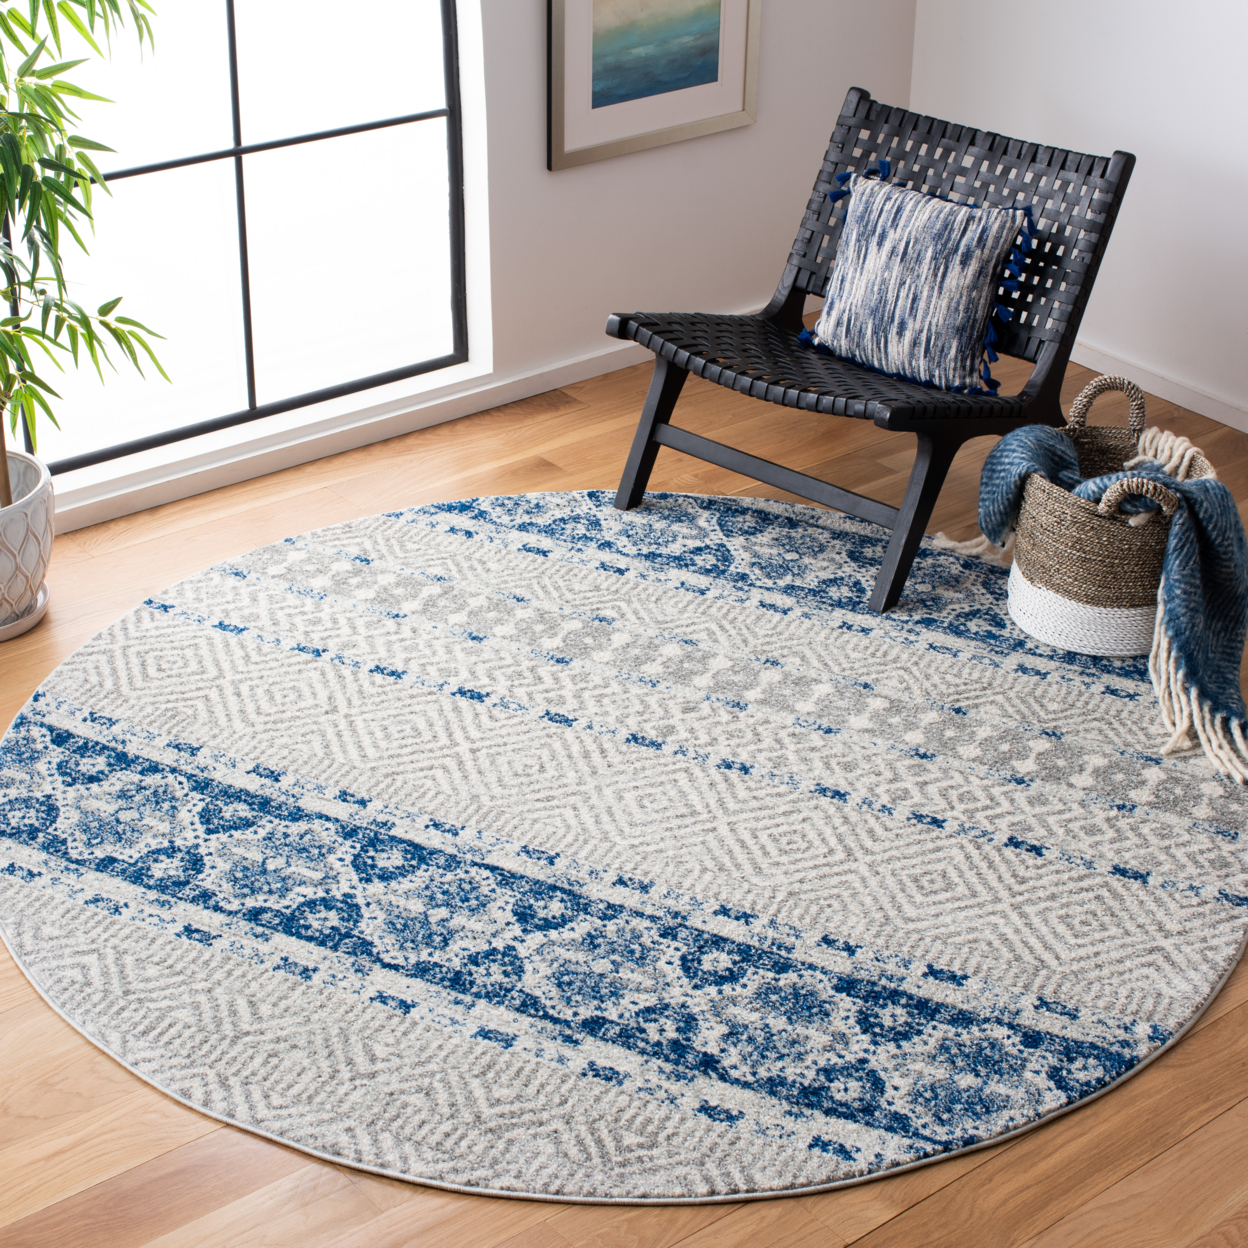 SAFAVIEH Madison Collection MAD797J Silver / Navy Rug - 6-7 X 6-7 Square